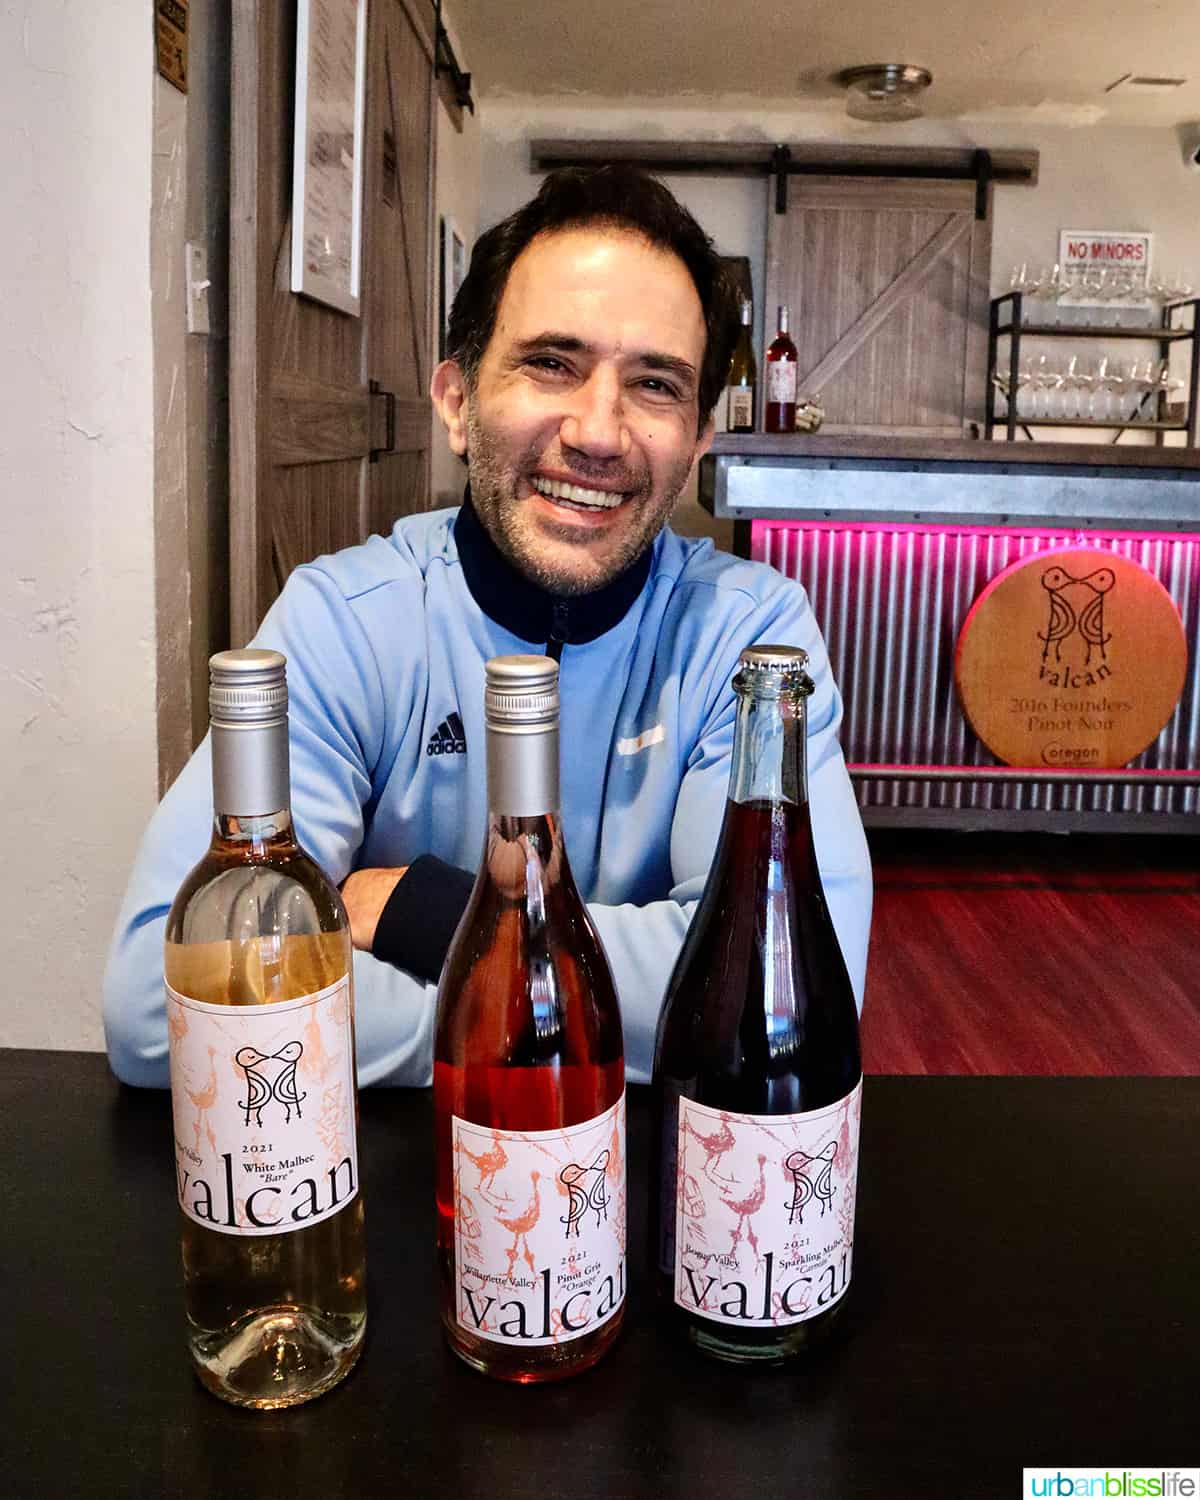 JP Valot, owner and winemaker of Valcan Cellars, with three bottles of wine in the tasting room.